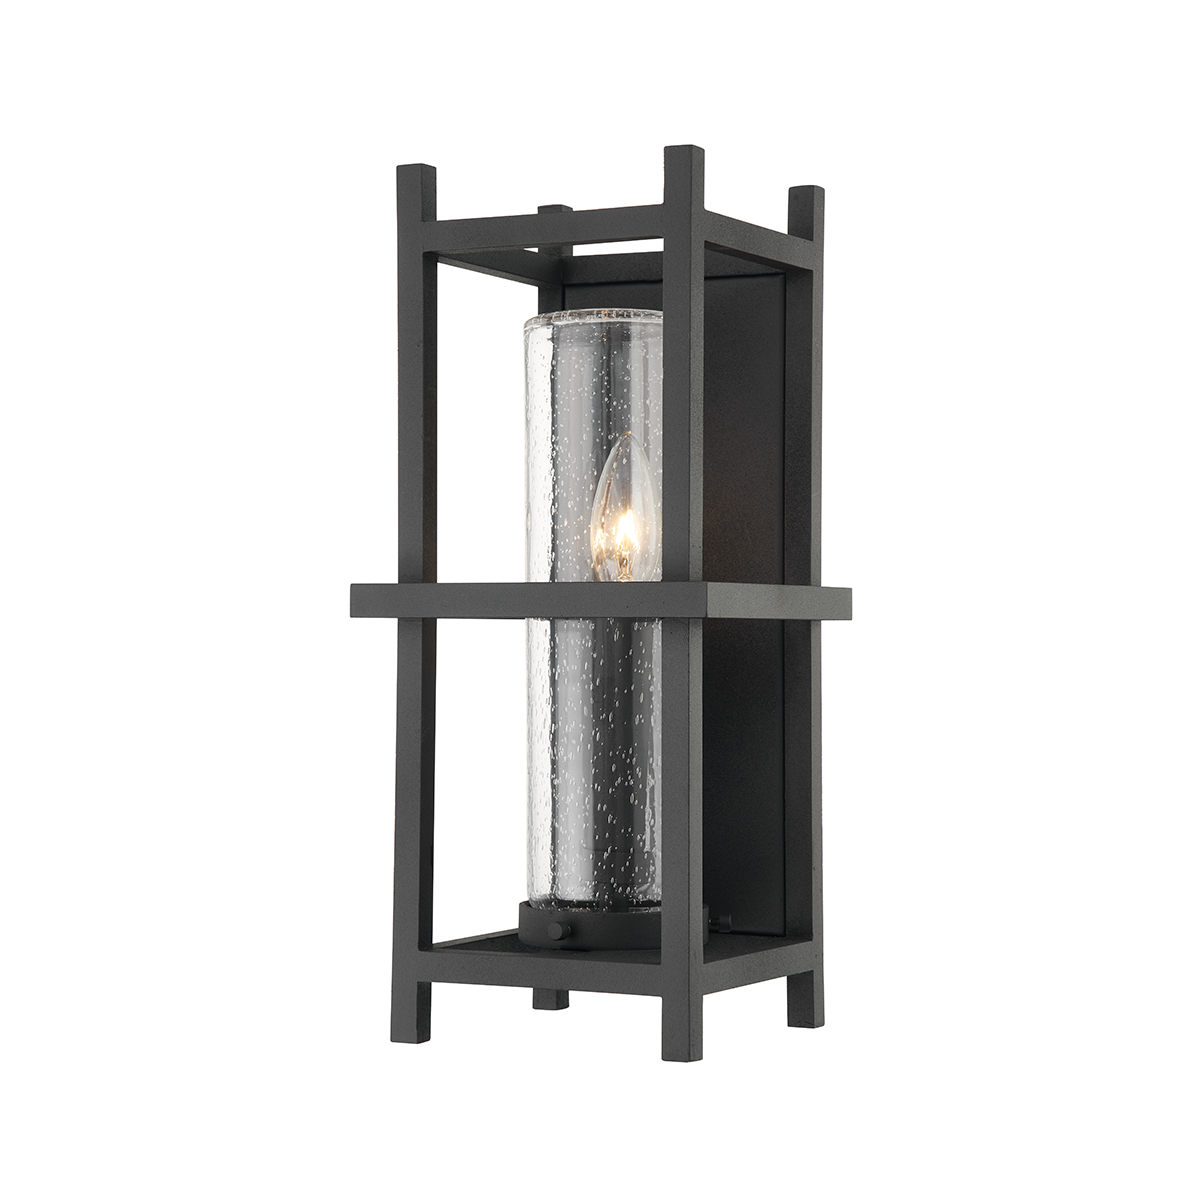 Troy Lighting 1 LIGHT SMALL EXTERIOR WALL SCONCE B7501 Outdoor l Wall Troy Lighting TEXTURED BLACK  